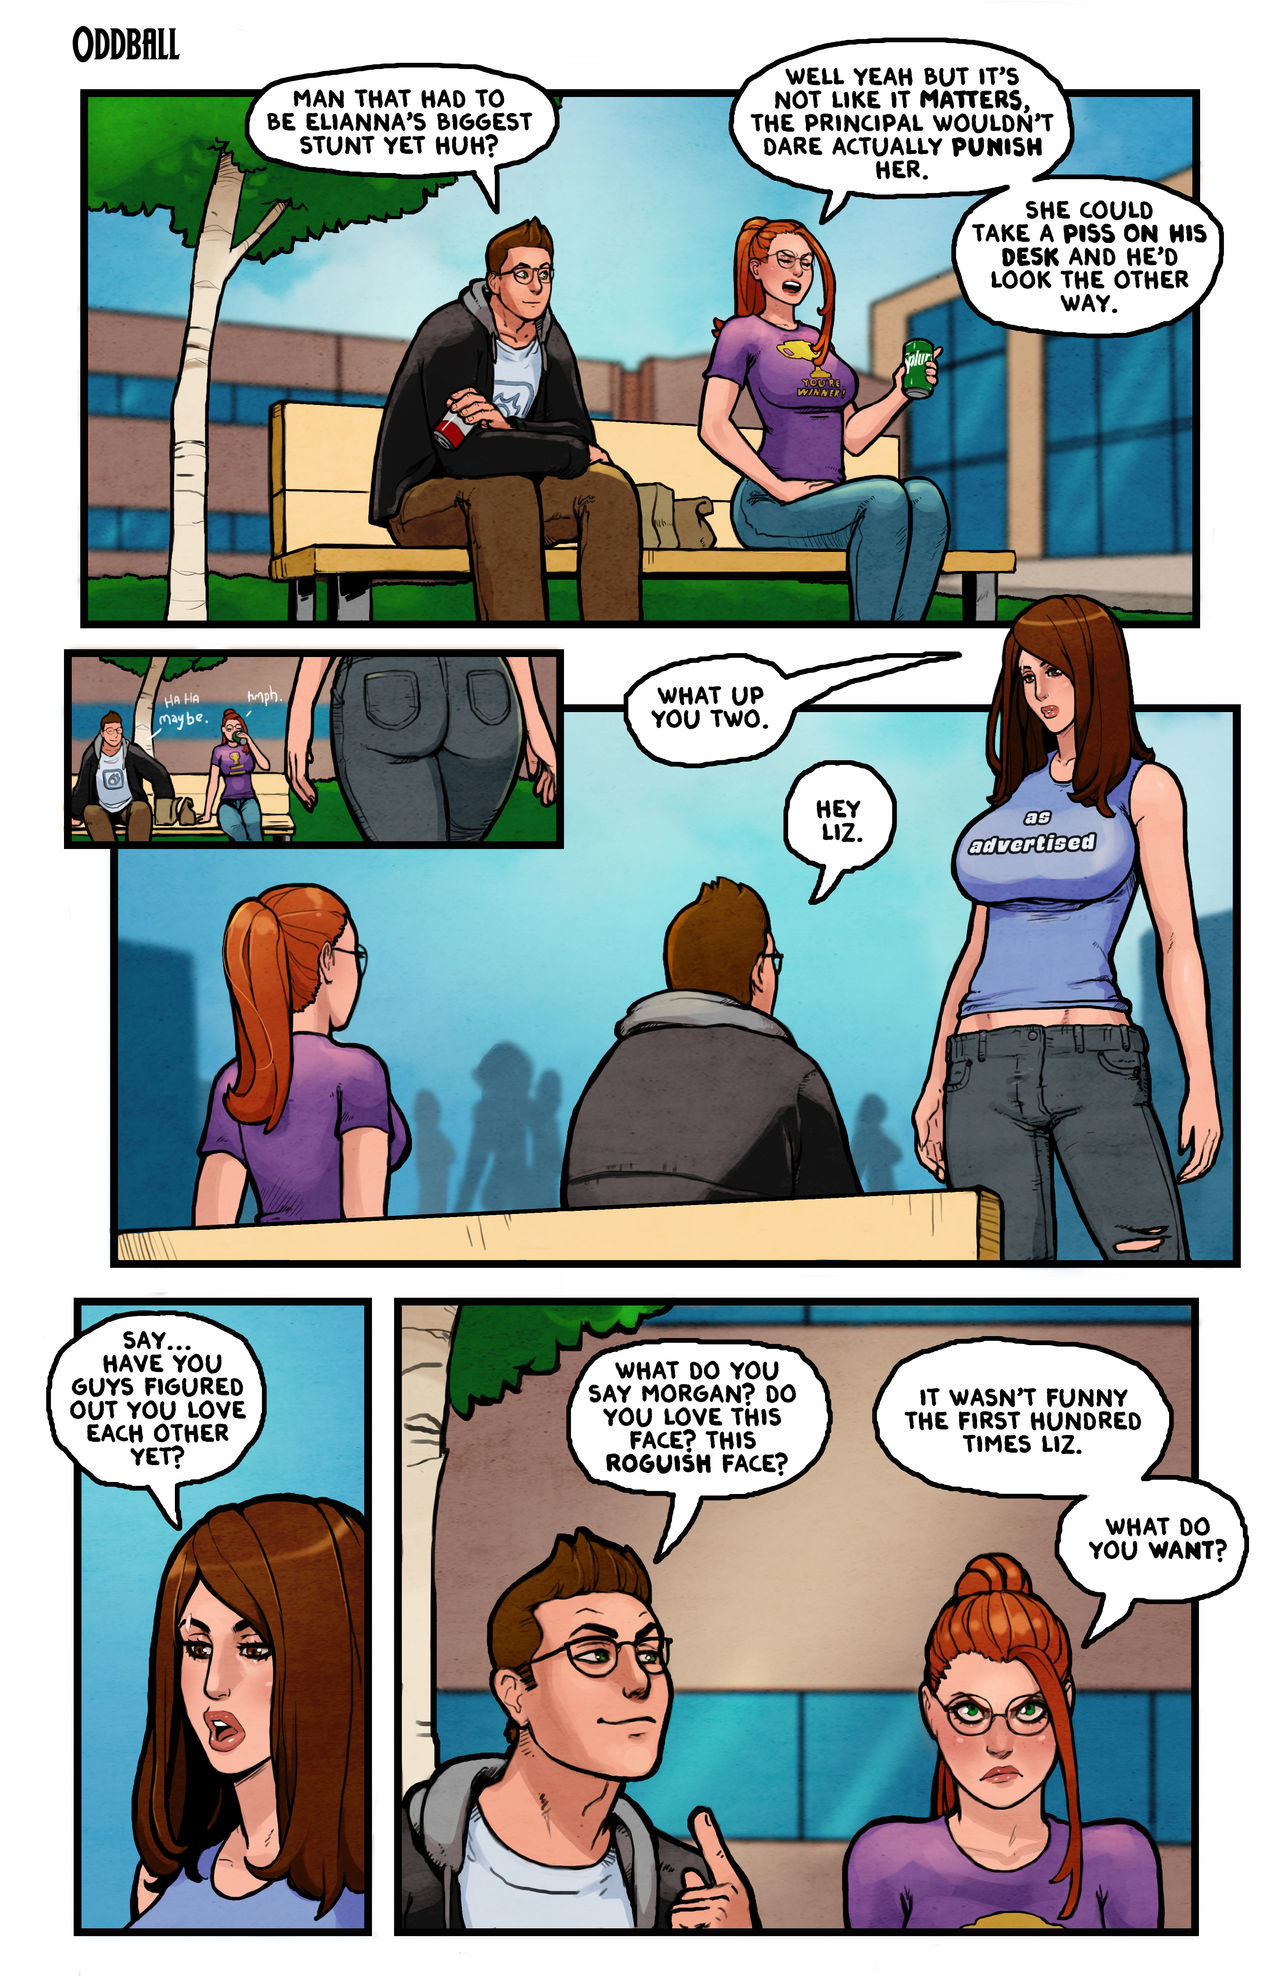 This Romantic World - Reinbach page 4